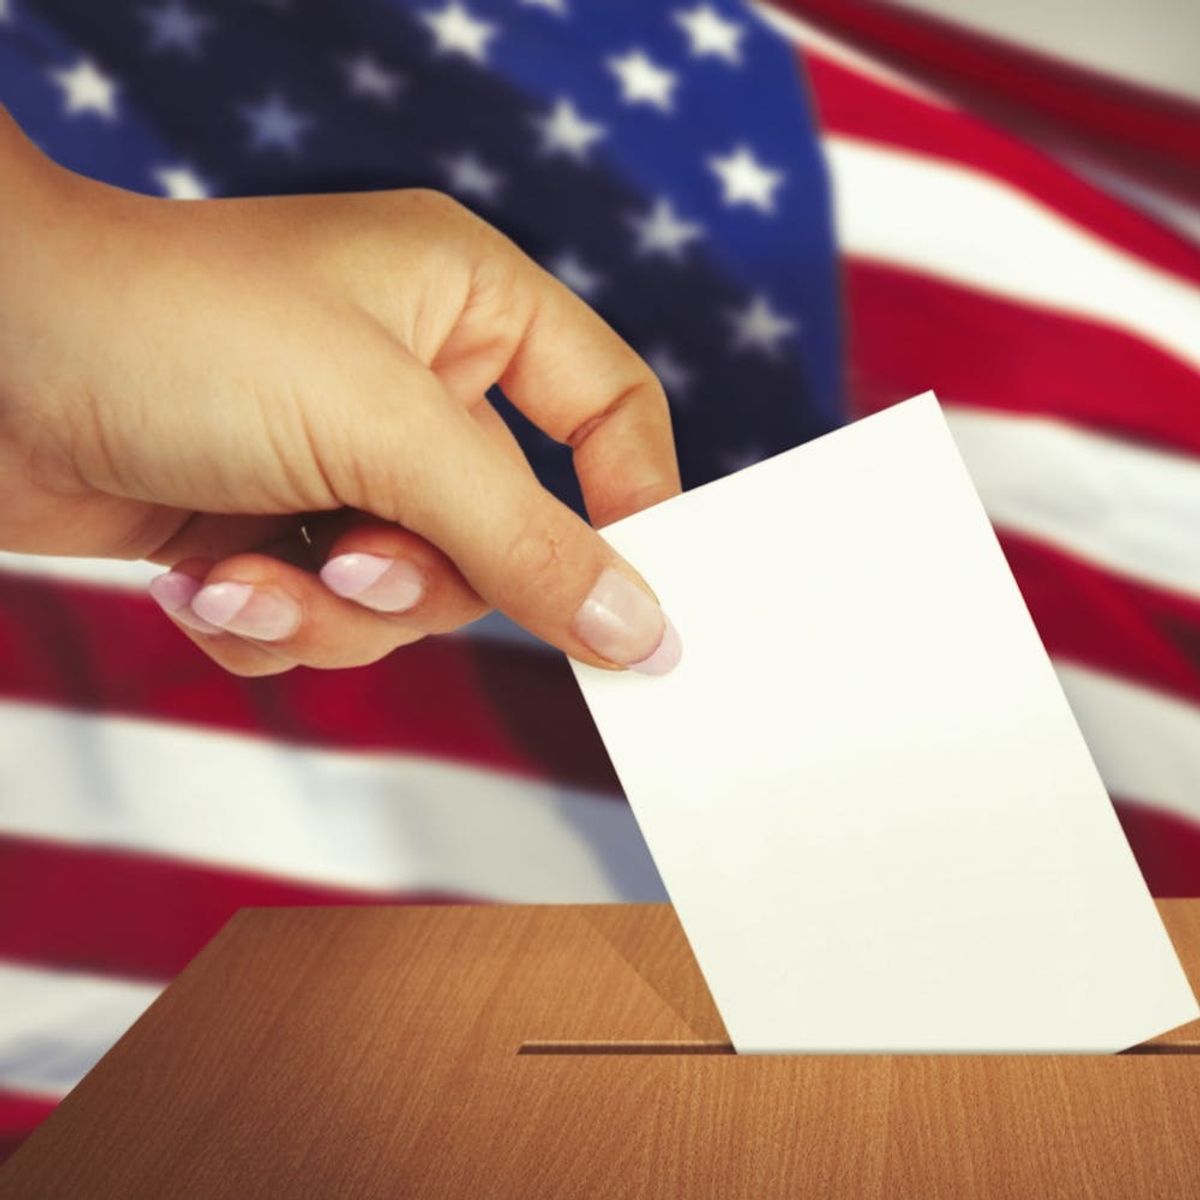 WTF: Now You Can Register to Vote With Twitter